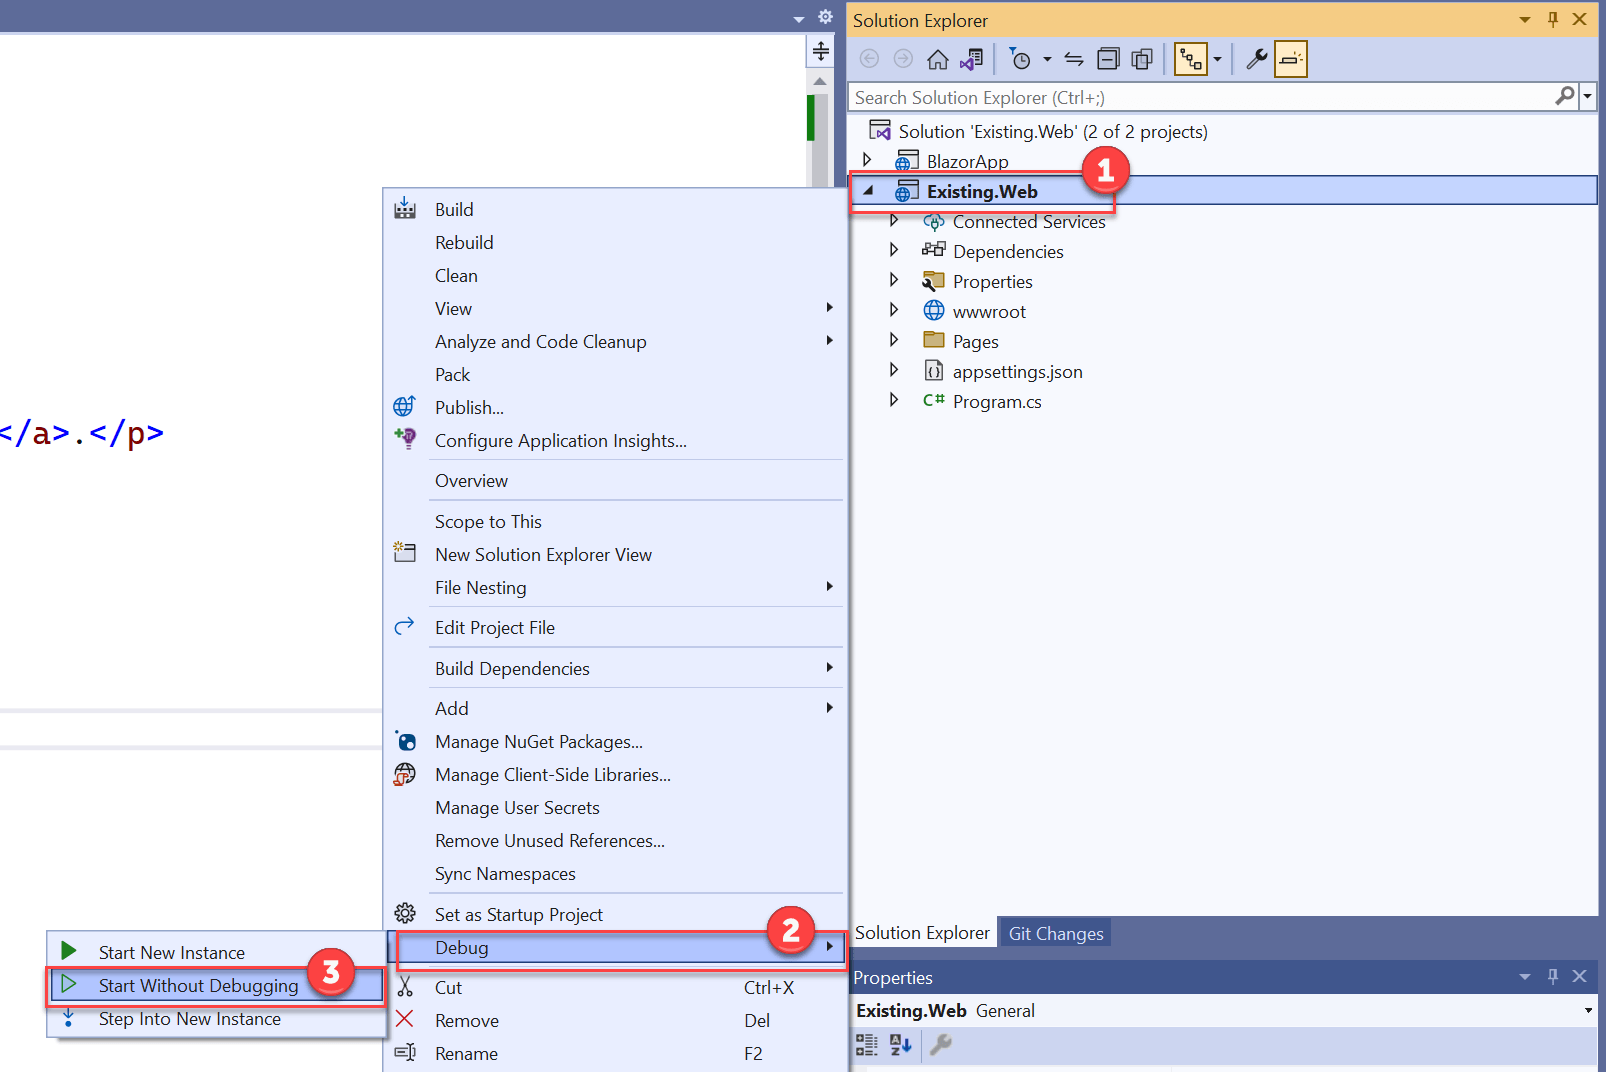 The context menu of the Existing.Web project displays with the Debug item expanded and the Start Without Debugging option selected.